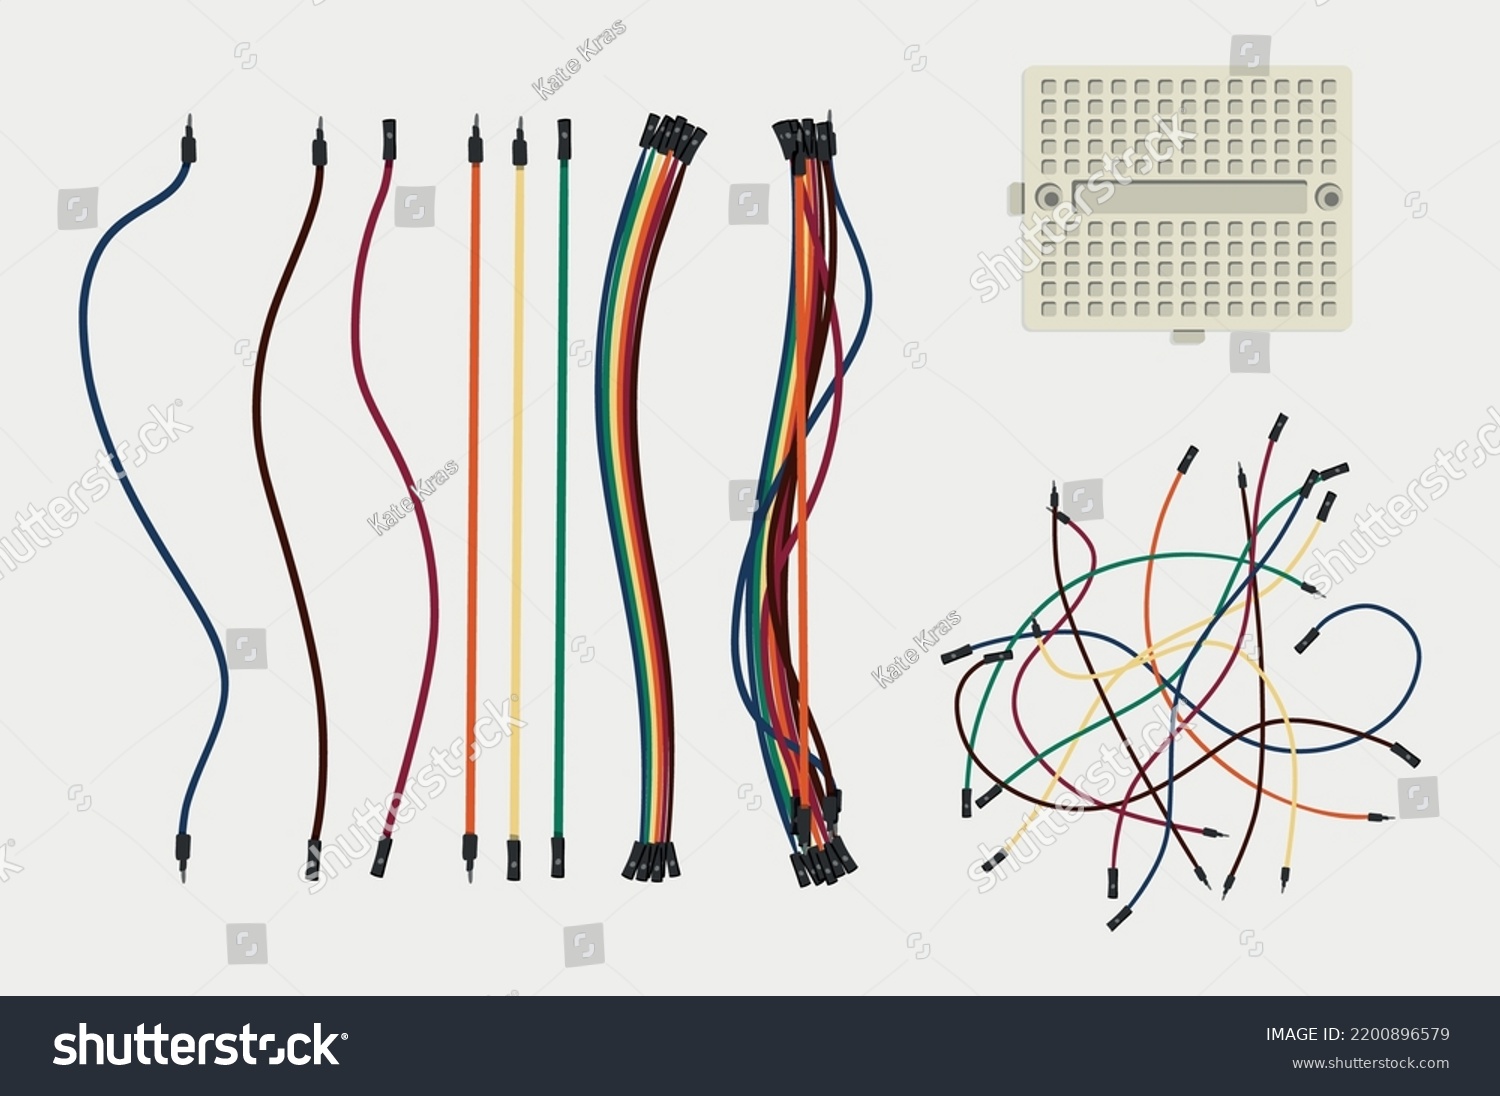 SVG of Conducting wires with breadboard top view	 svg